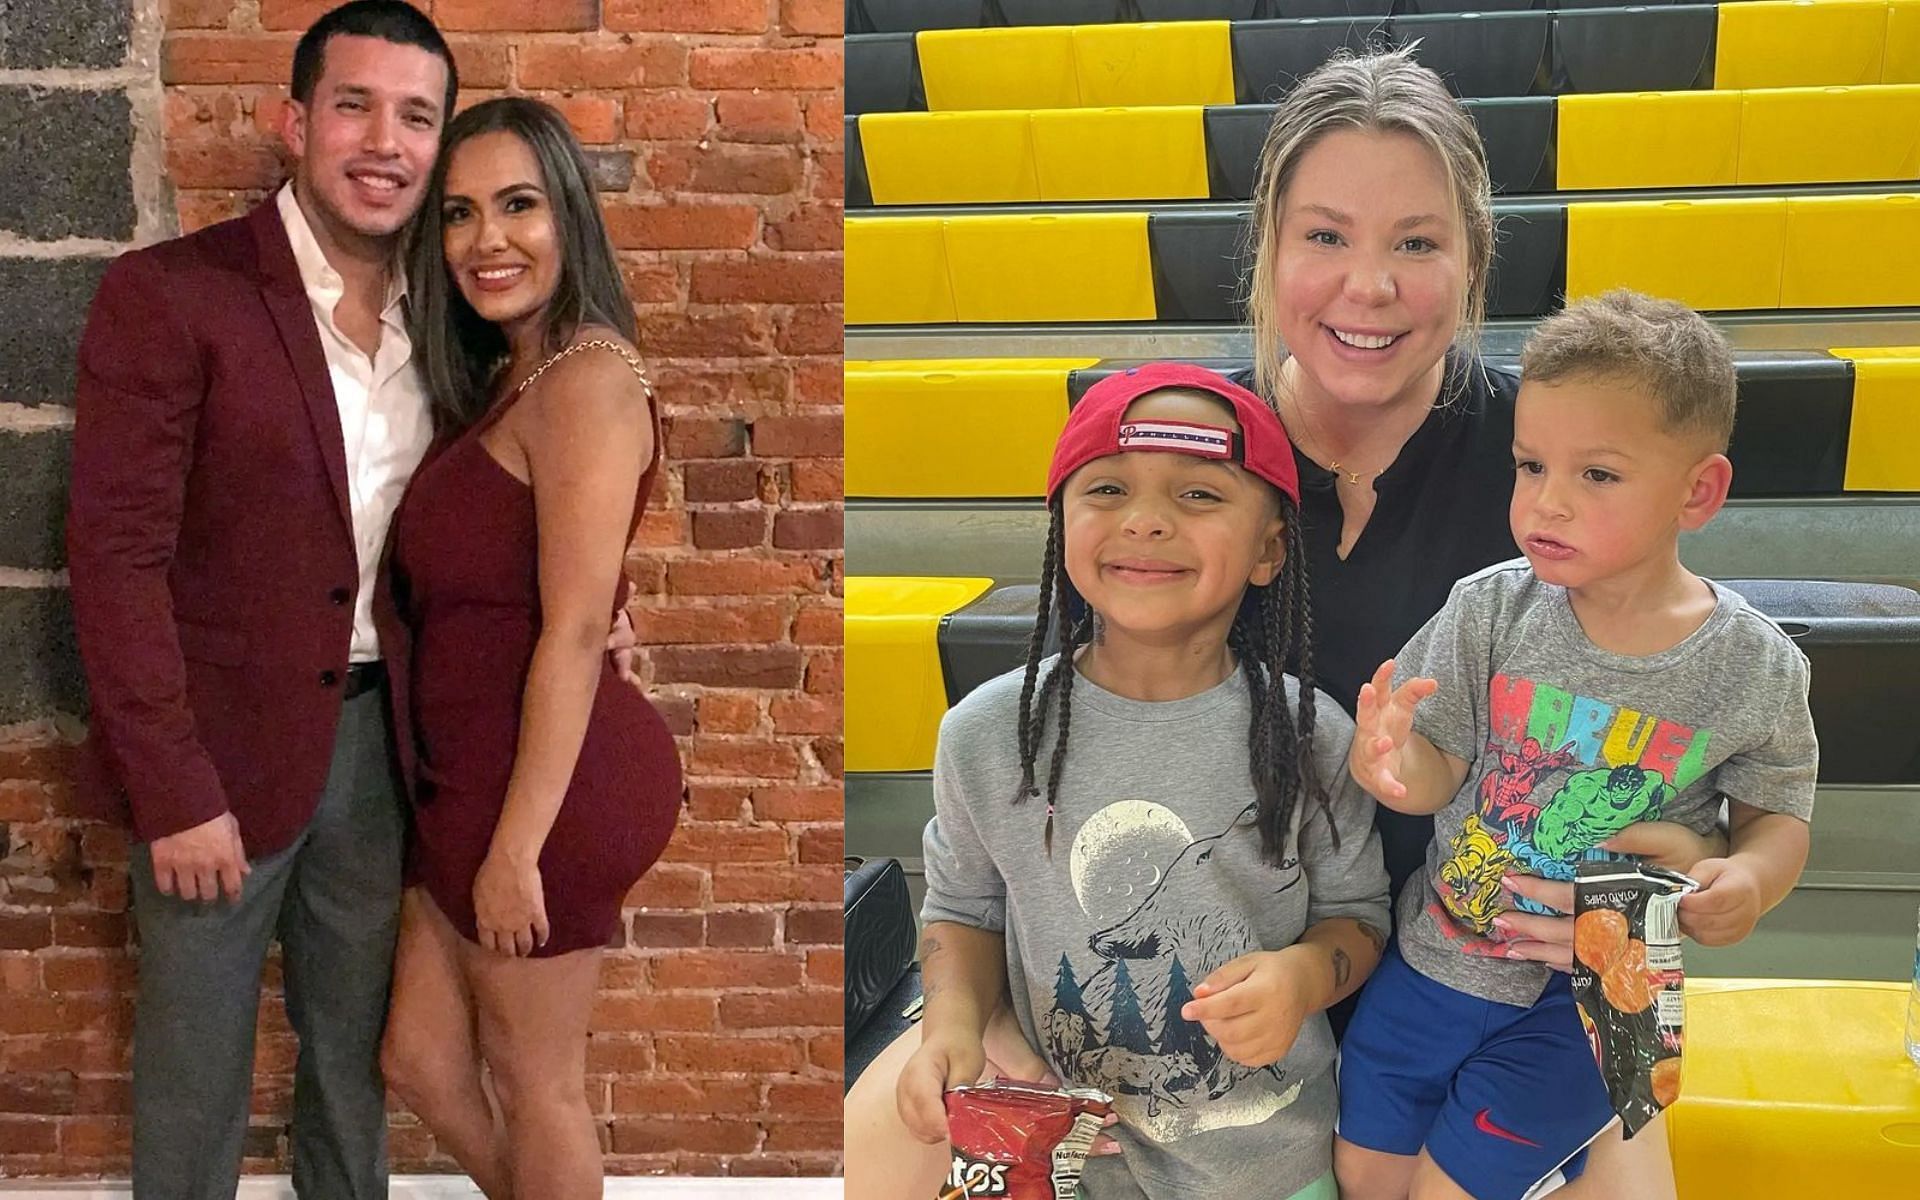 Briana speaks about her issues with Kailyn Lowry again in her new show (Images via PEOPLE and kaillowry/Instagram)